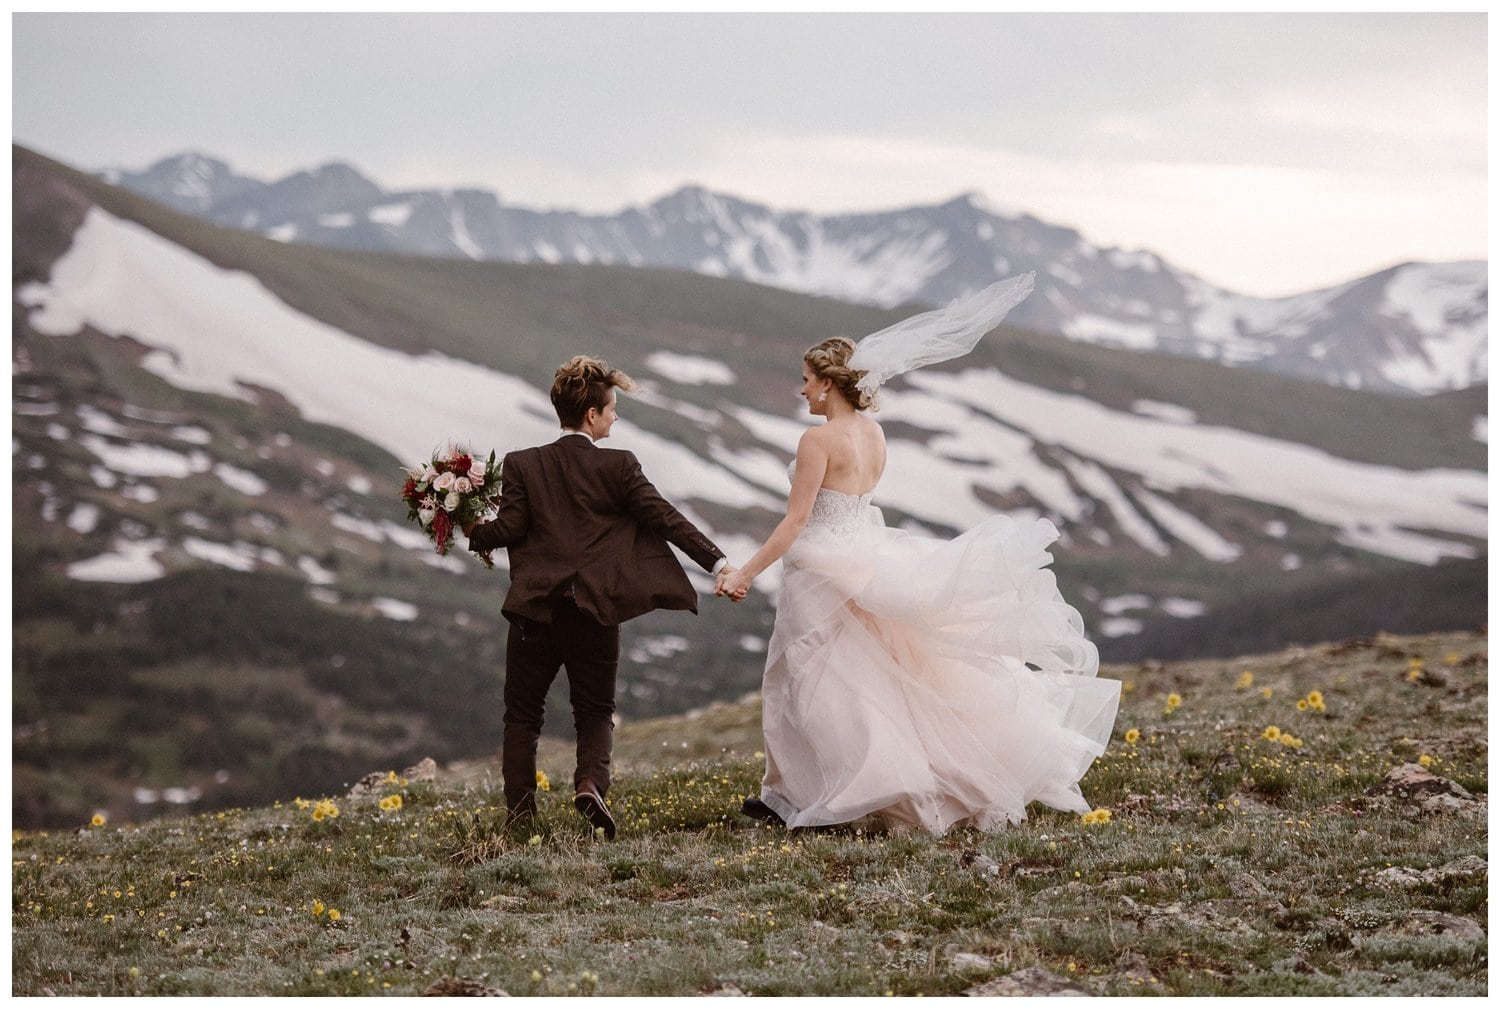 Two brides hold hands and walk through meadow with yellow wildflowers at Trail Ridge Road in Rocky Mountain National Park Colorado. There are snow-capped mountains in the background. 